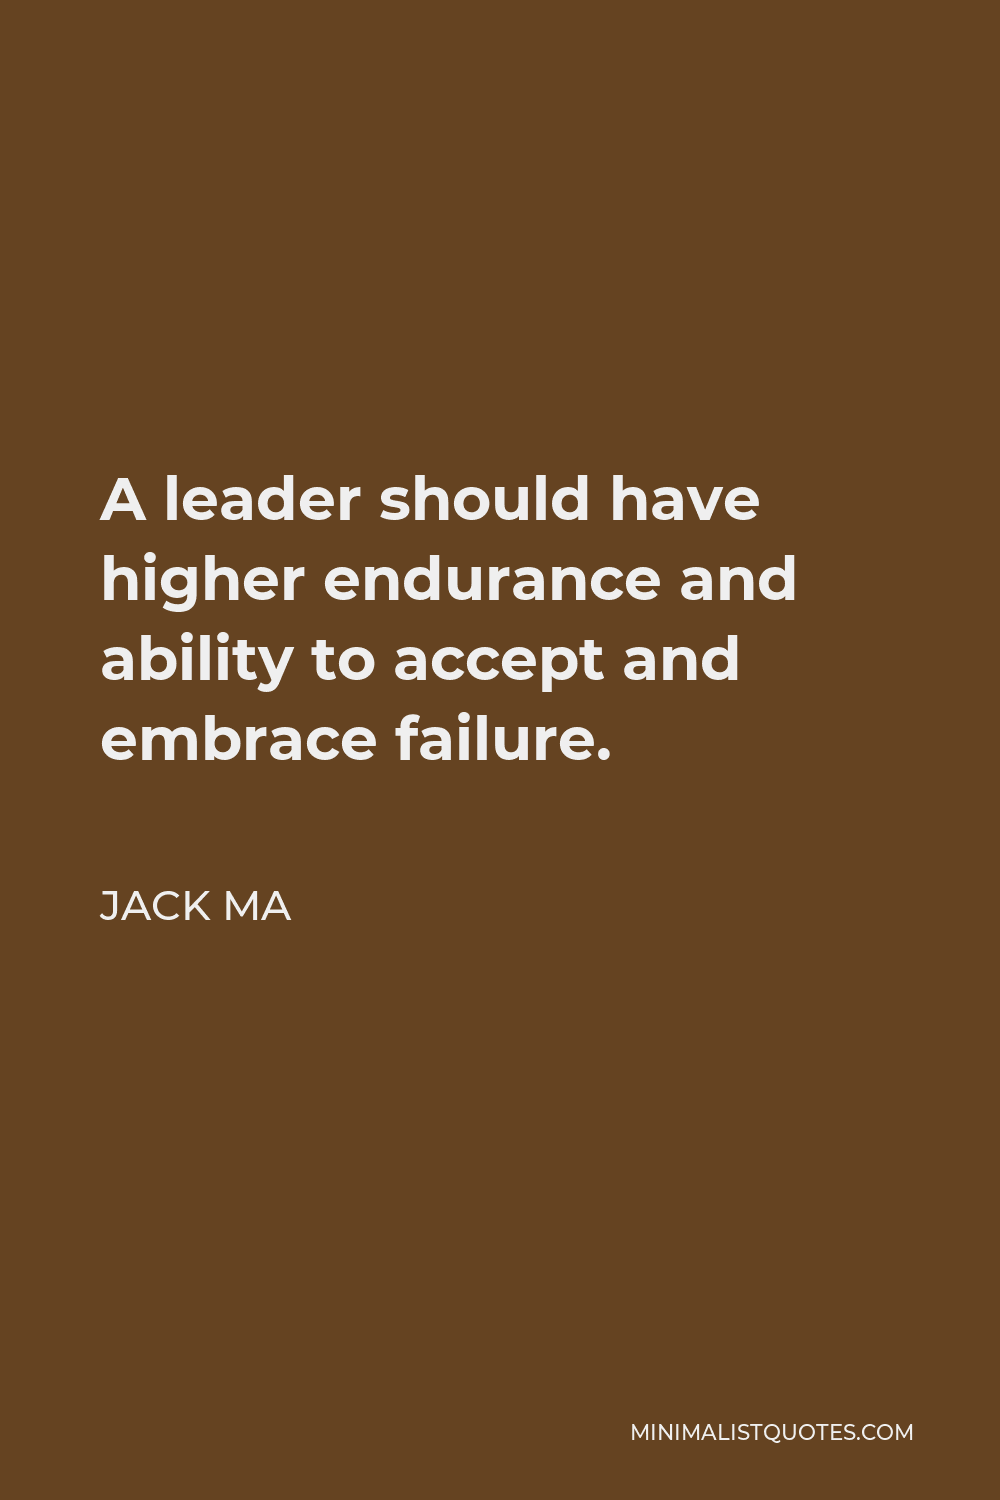 Jack Ma Quote - A leader should have higher endurance and ability to accept and embrace failure.